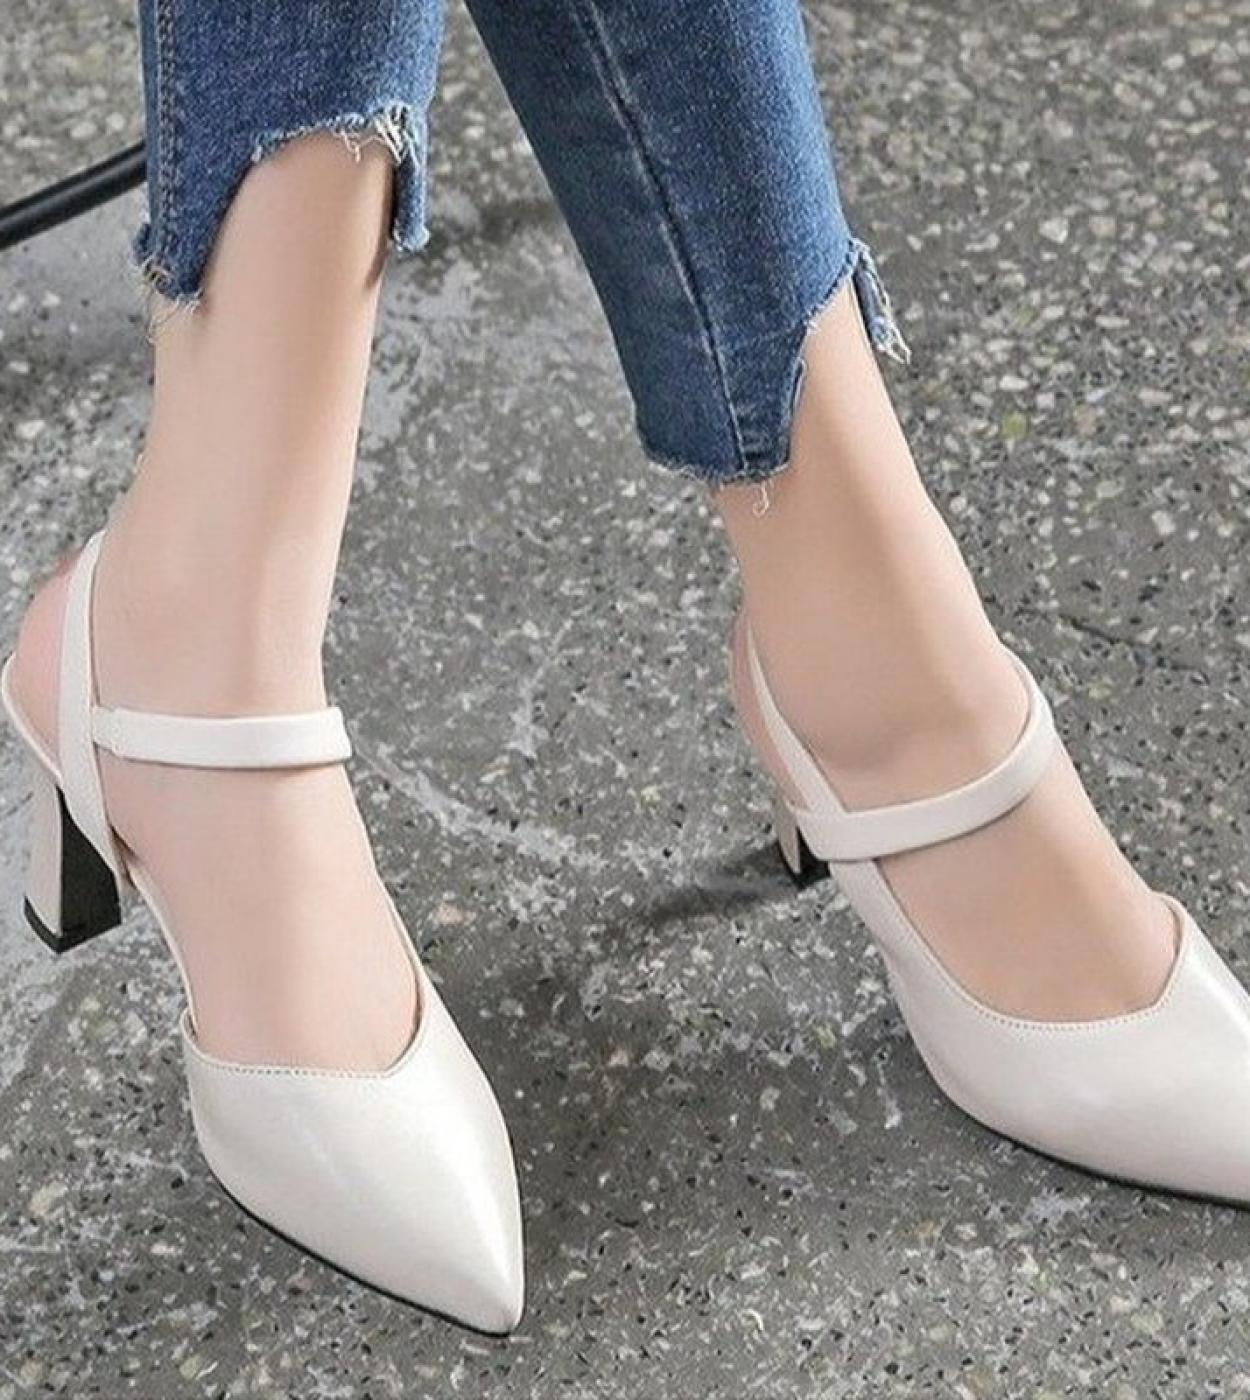 Leather Sandals Womens Mid Heels Summer Wild Chunky Heels Ankle Strap Pumps Closed Toe Back Empty Fashion Sandals Women